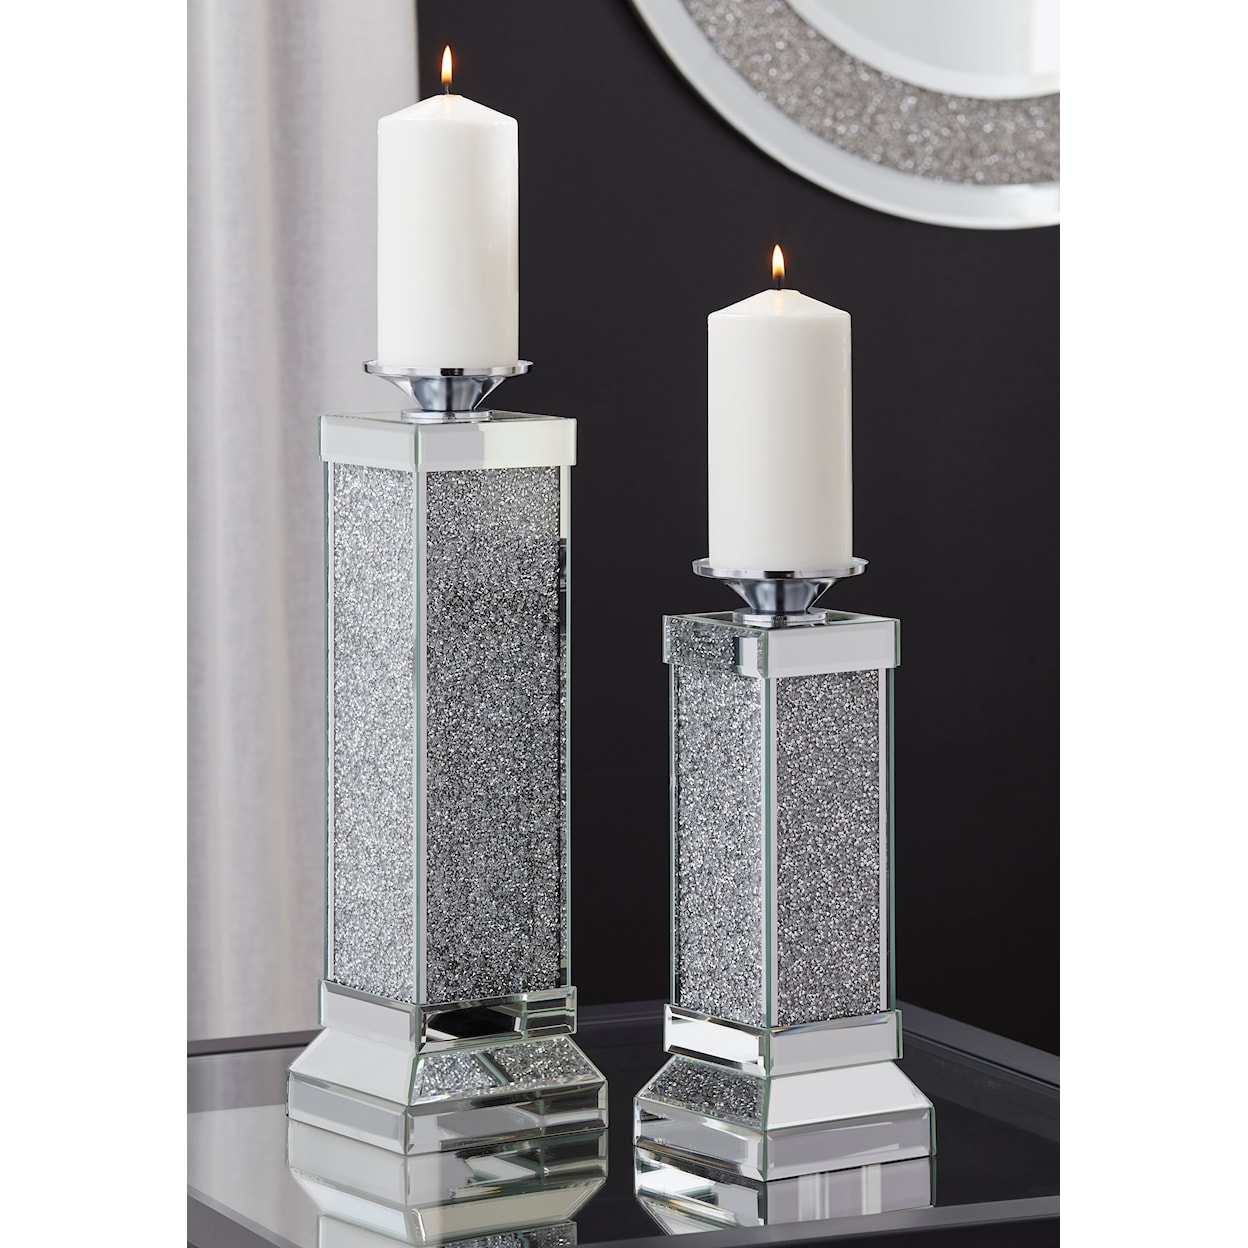 Benchcraft Accents Charline Candle Holder (Set of 2)